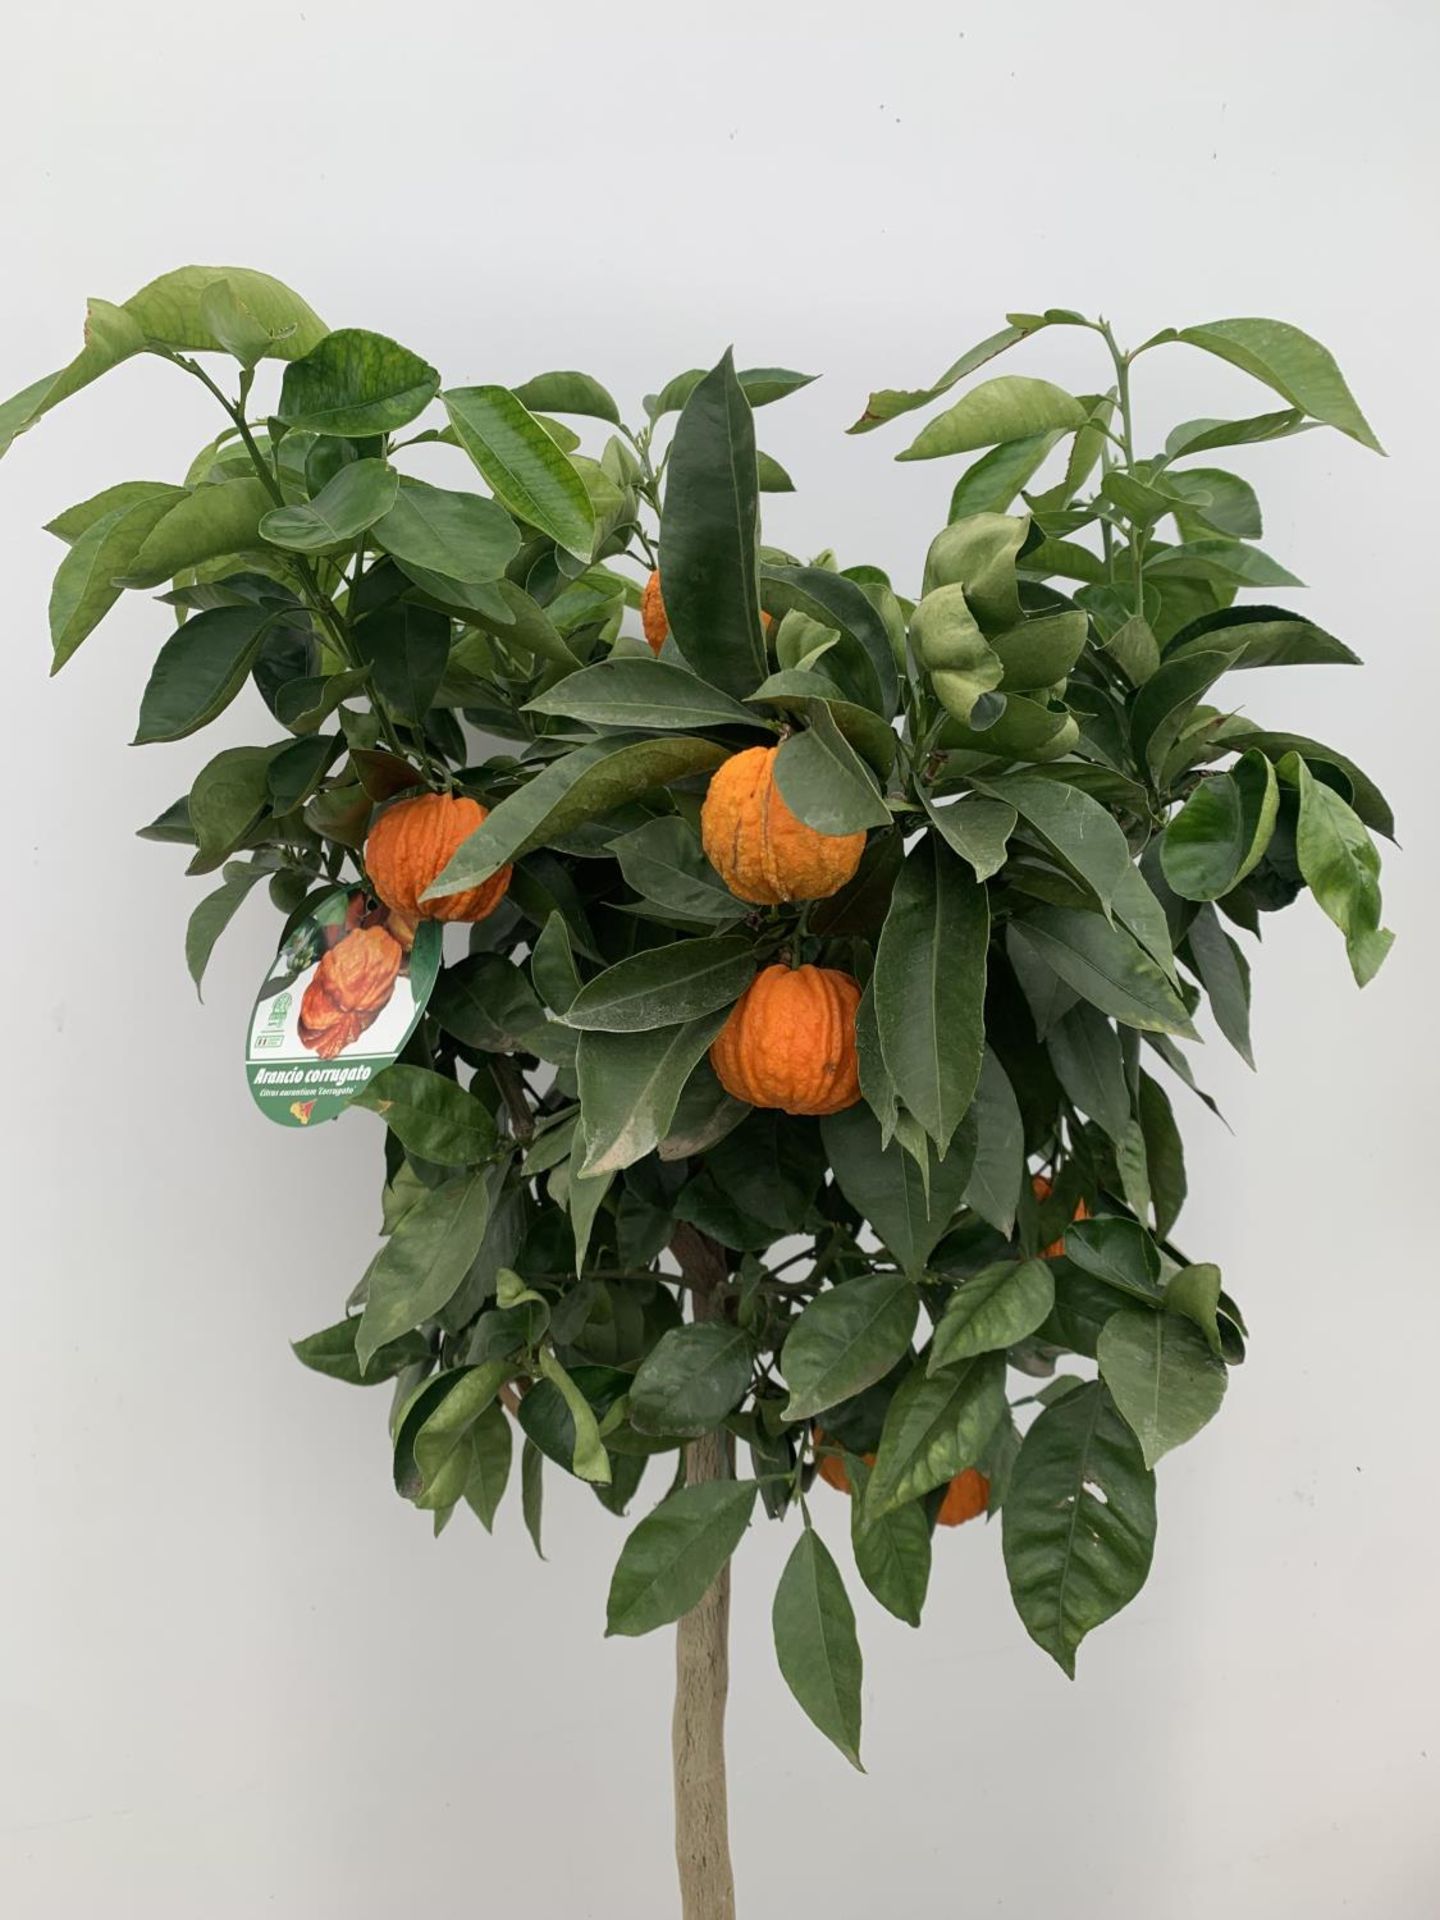 ONE ARANCIO CORRUGATO RARE CITRUS ORANGE FRUIT TREE WITH FRUIT APPROX 150CM IN HEIGHT IN A 25LTR POT - Image 6 of 9